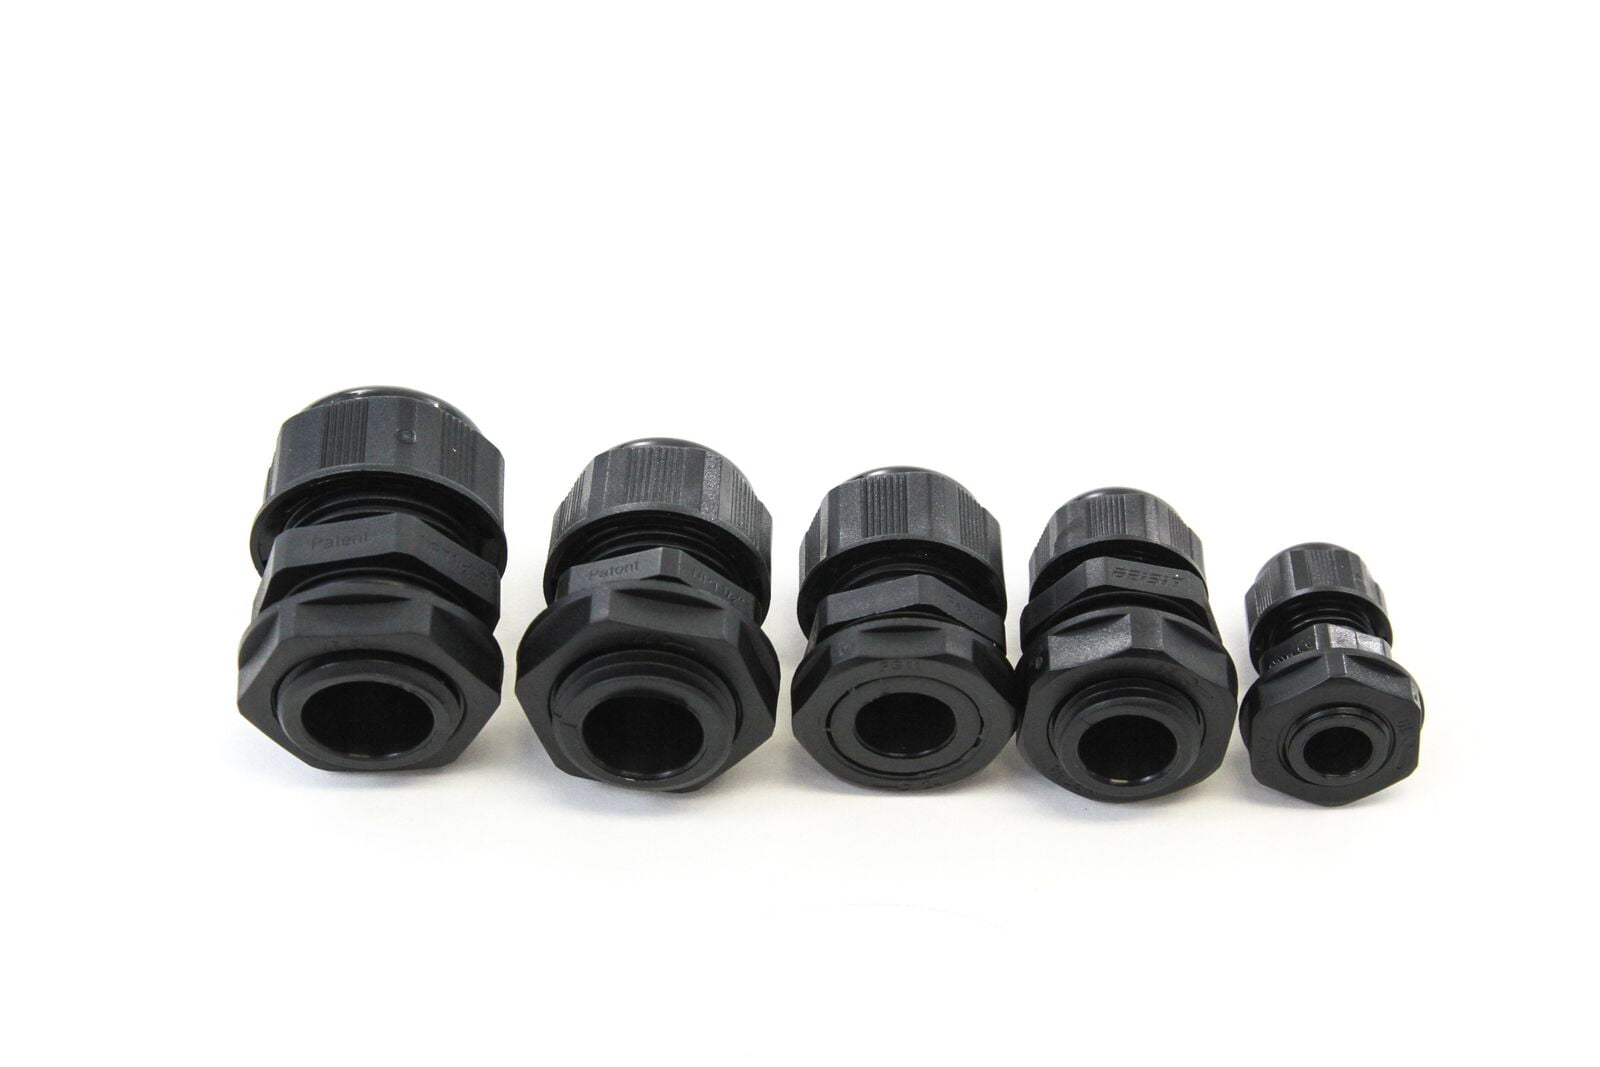 20 pcs Cable Glands 5 sizes Variety Pack 3.5 to 14 MM Lock Nut Connector Joint 